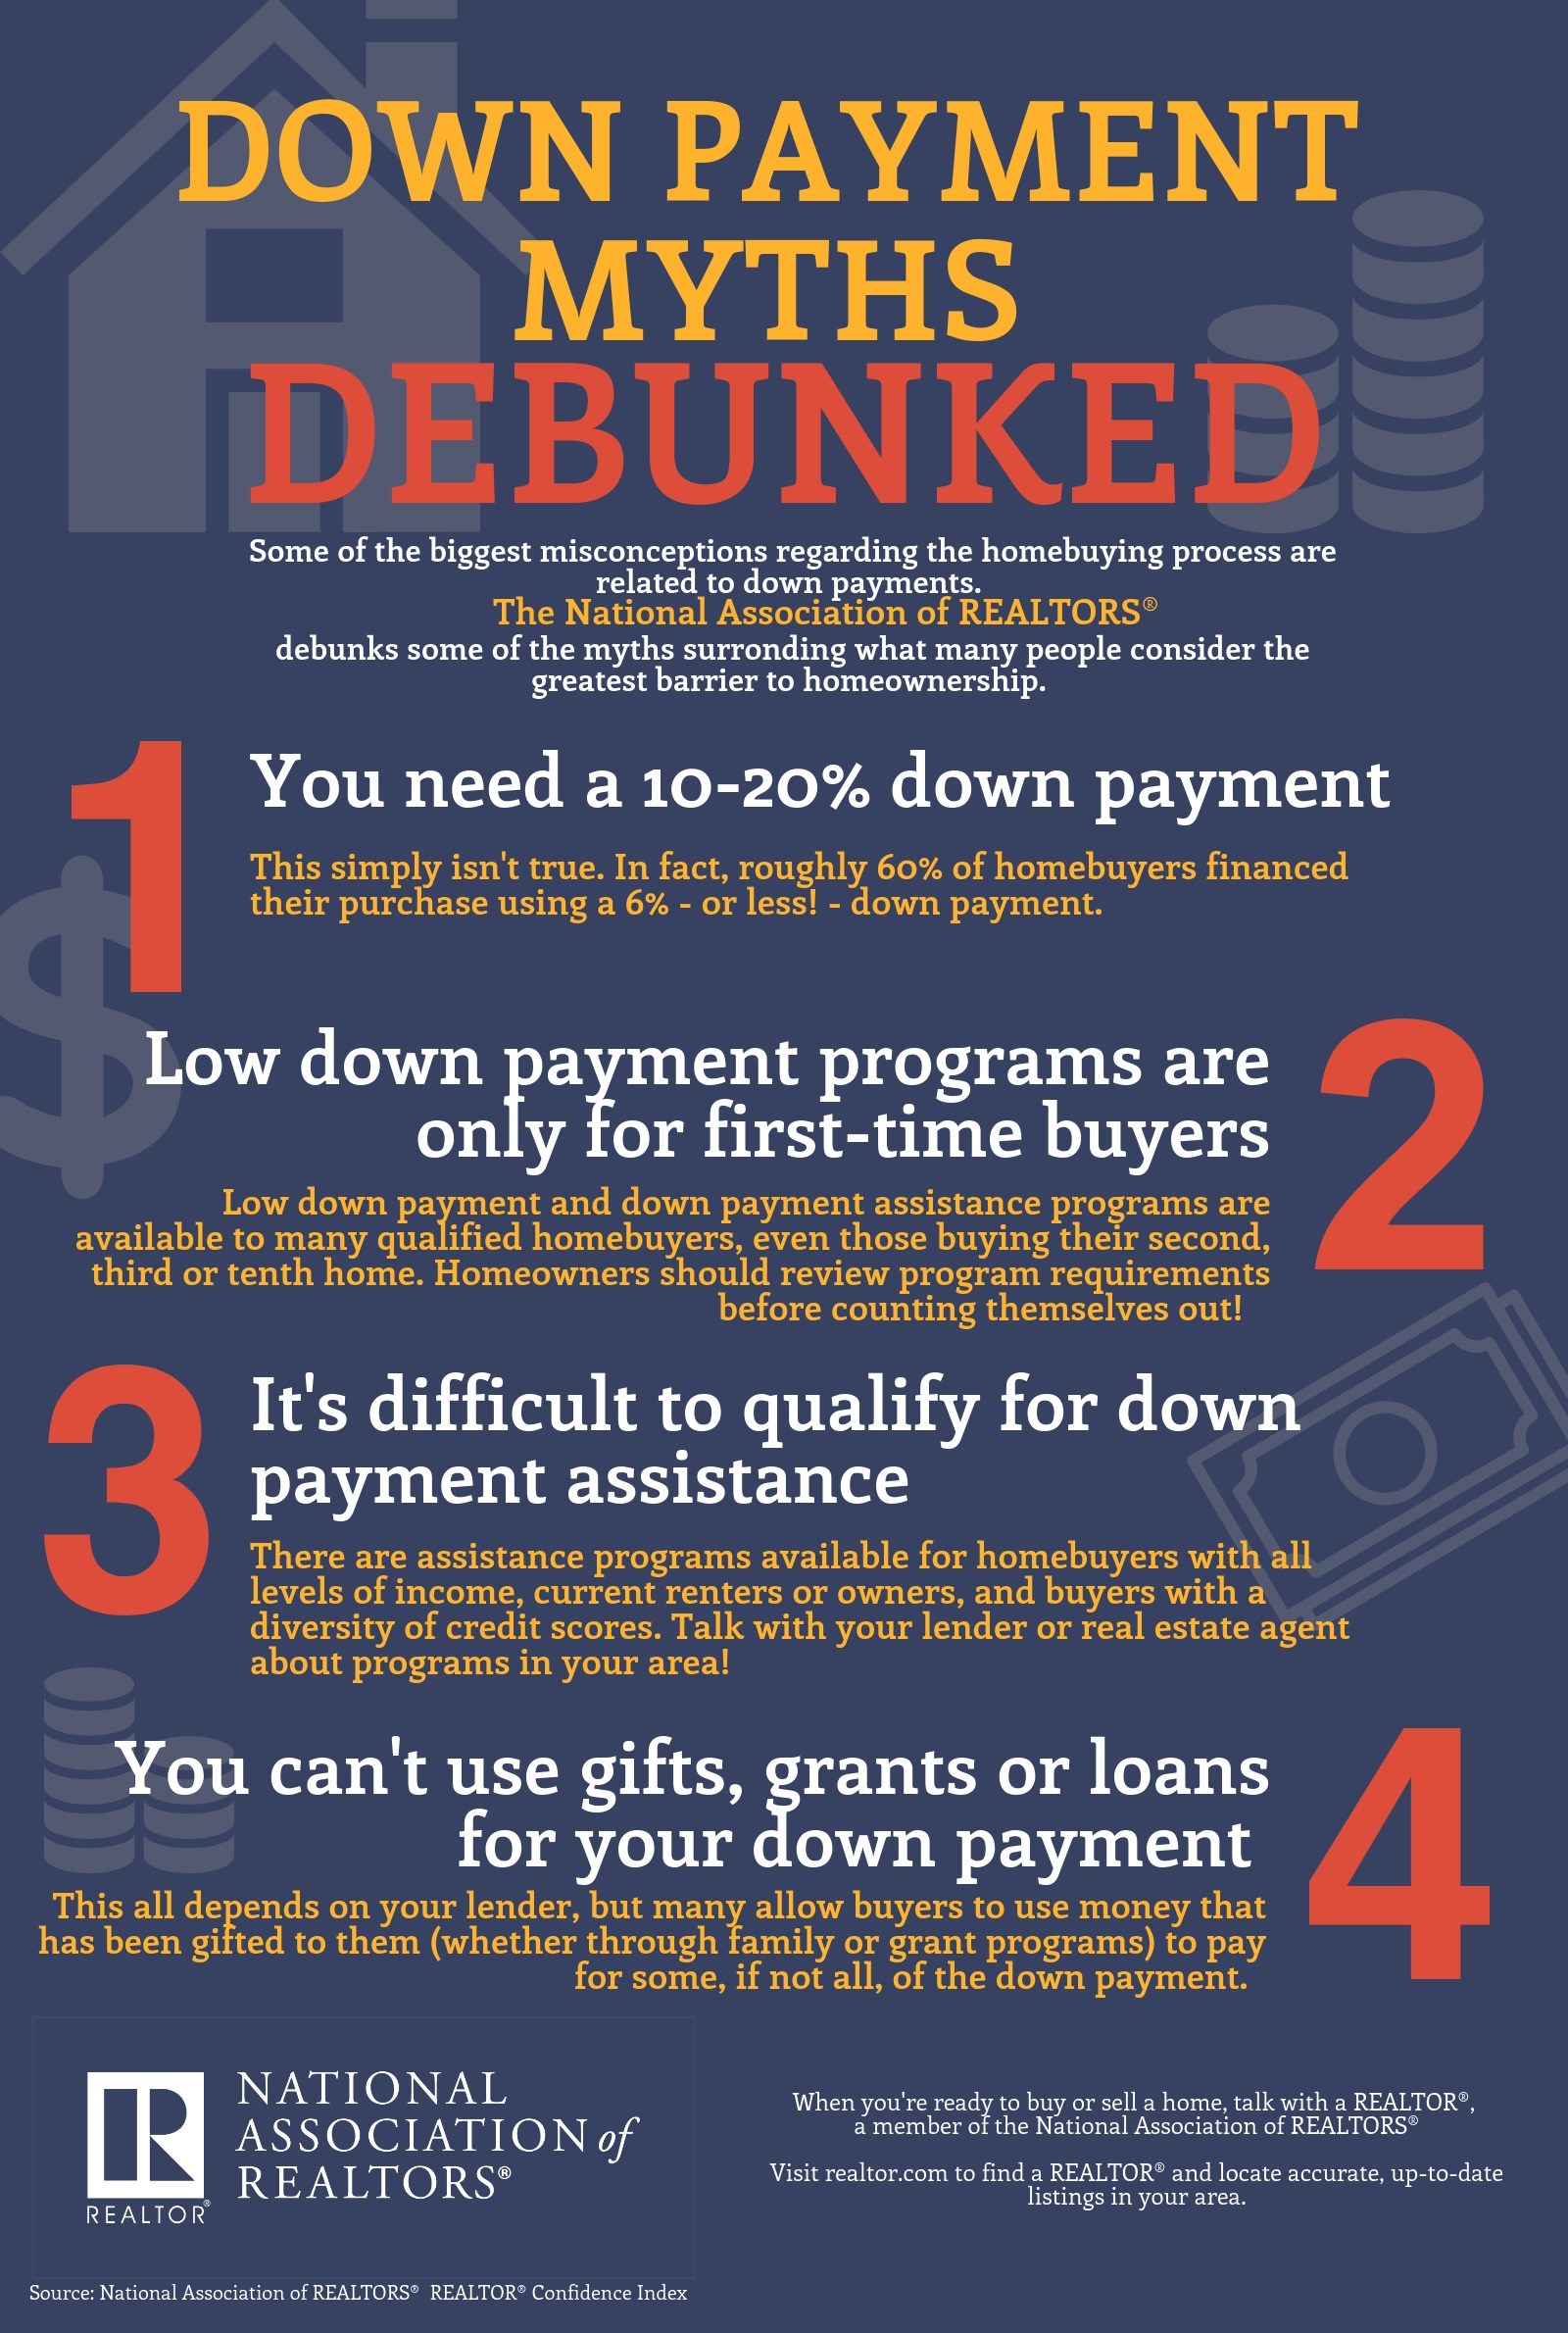 nar Down payment myths 2017 Infographic